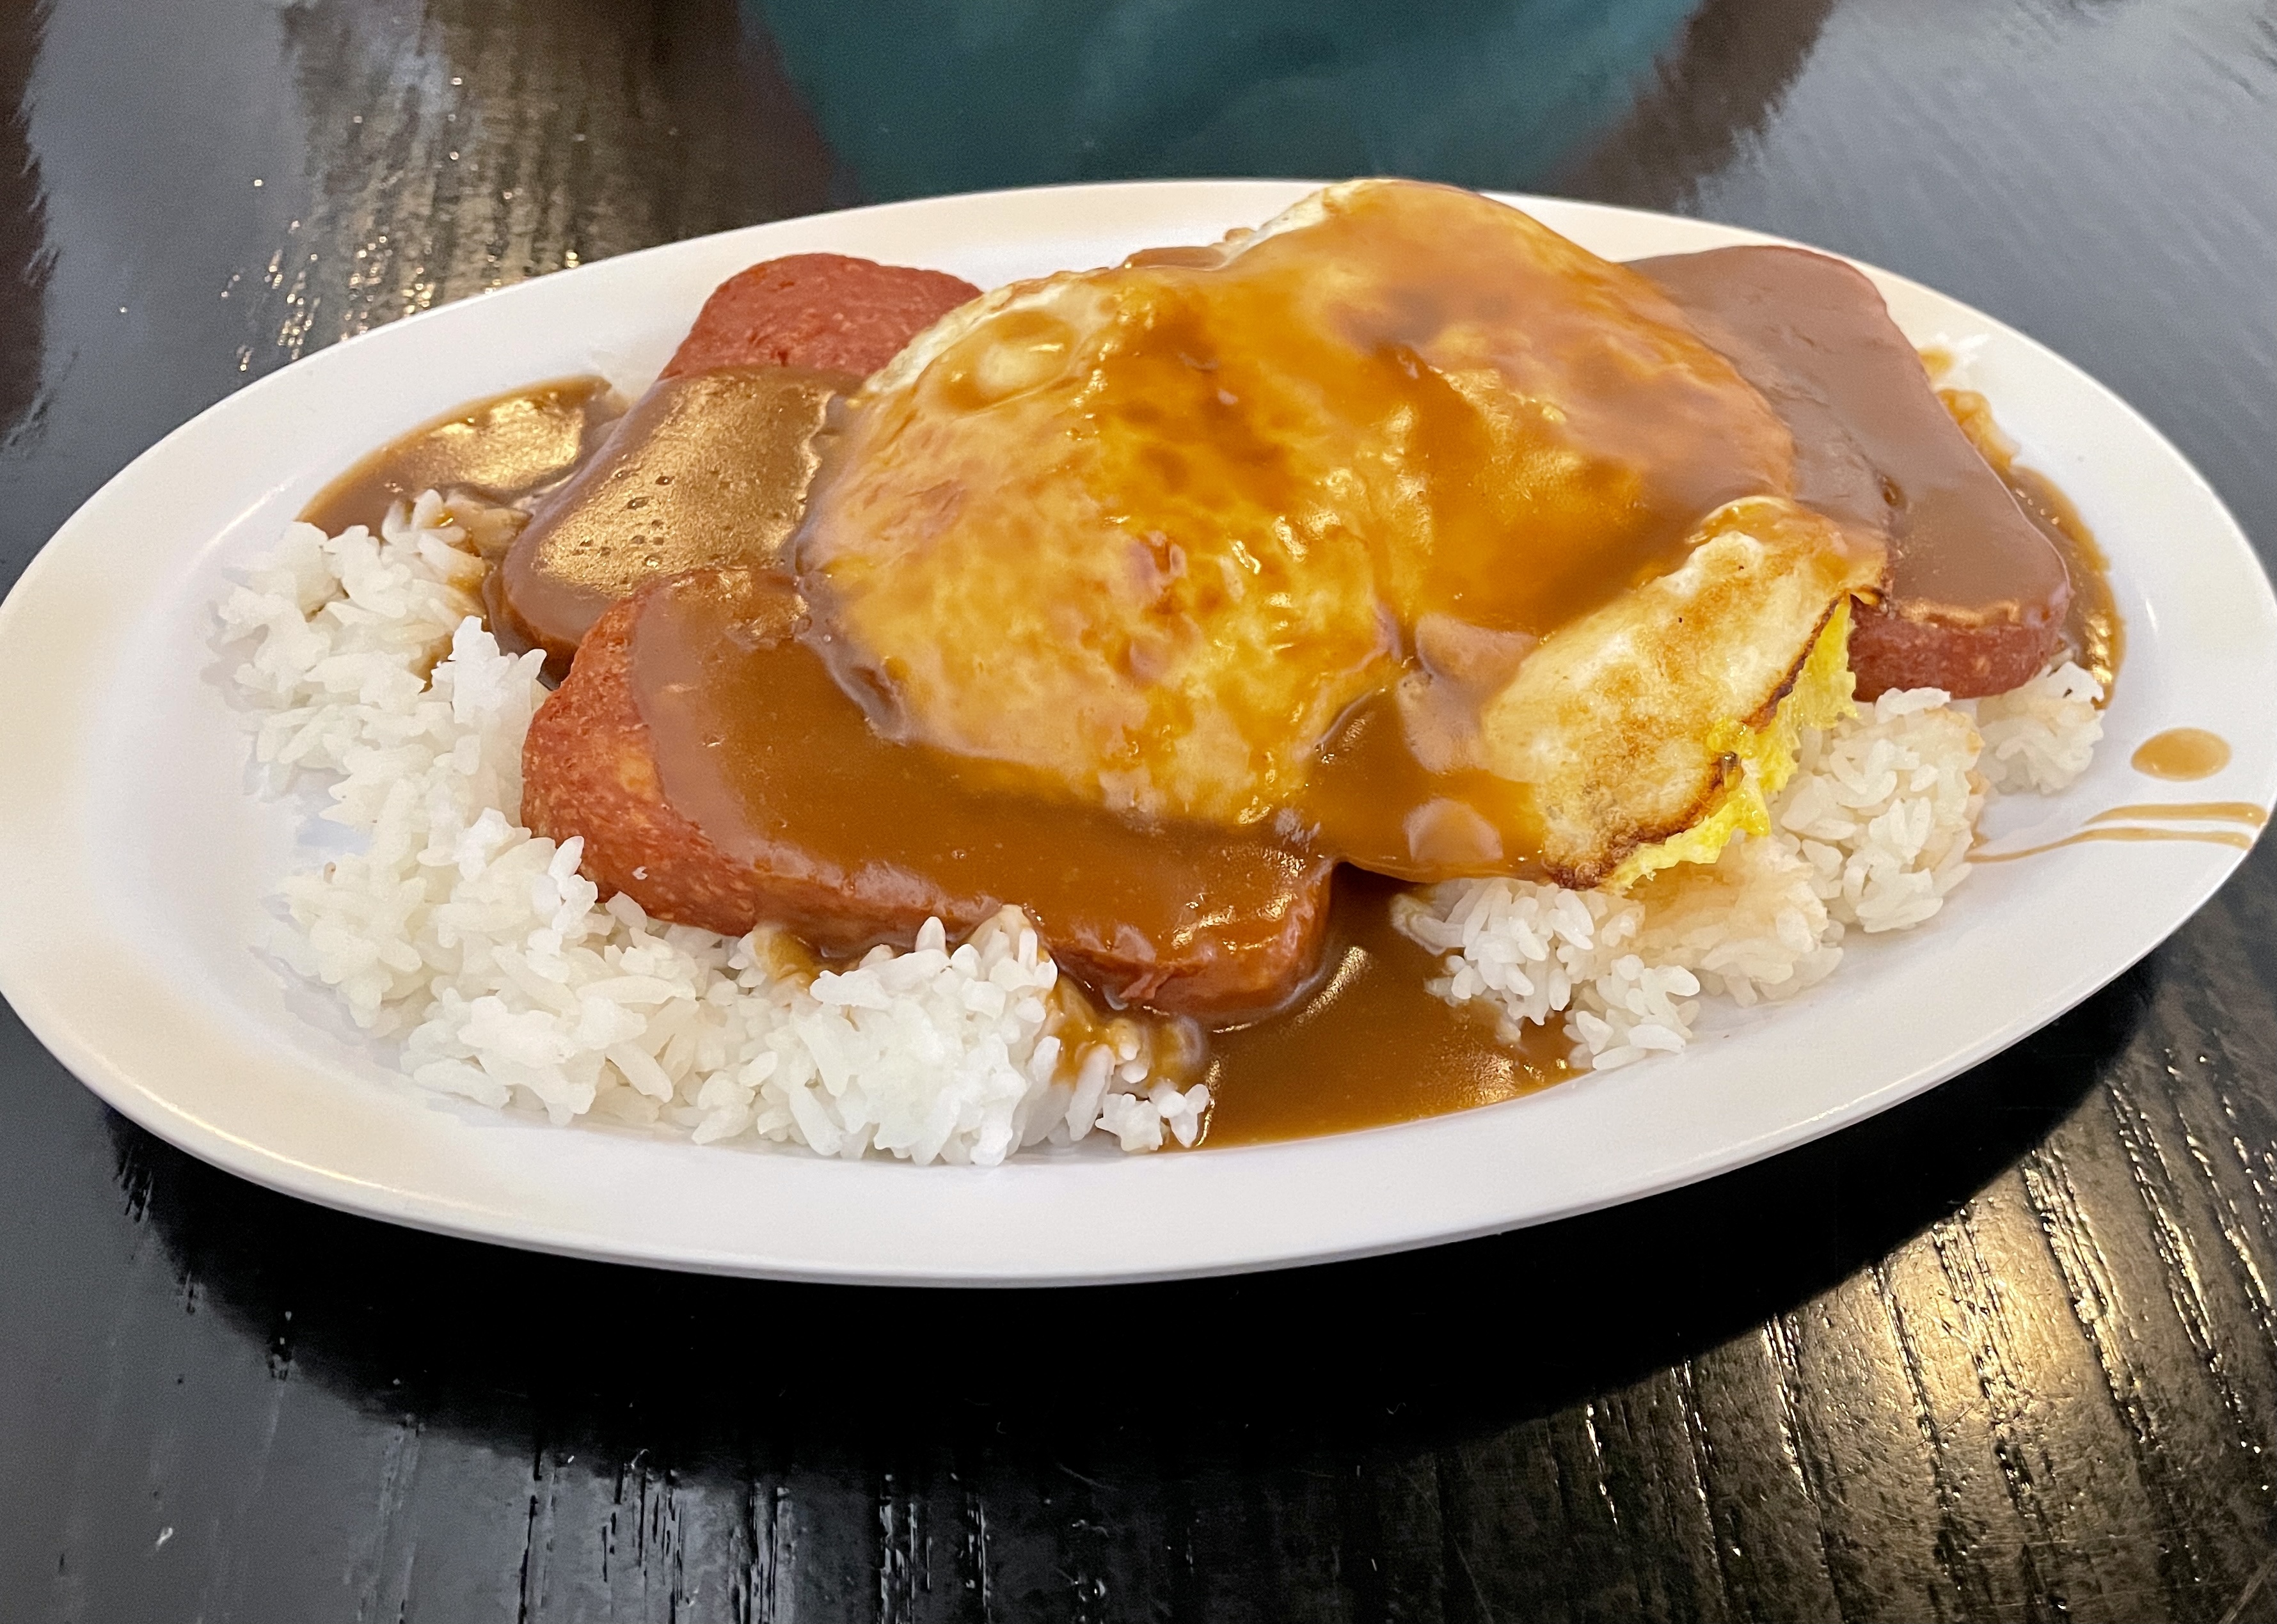 Loco Moco with rice, spam, eggs over hard, and brown gravy